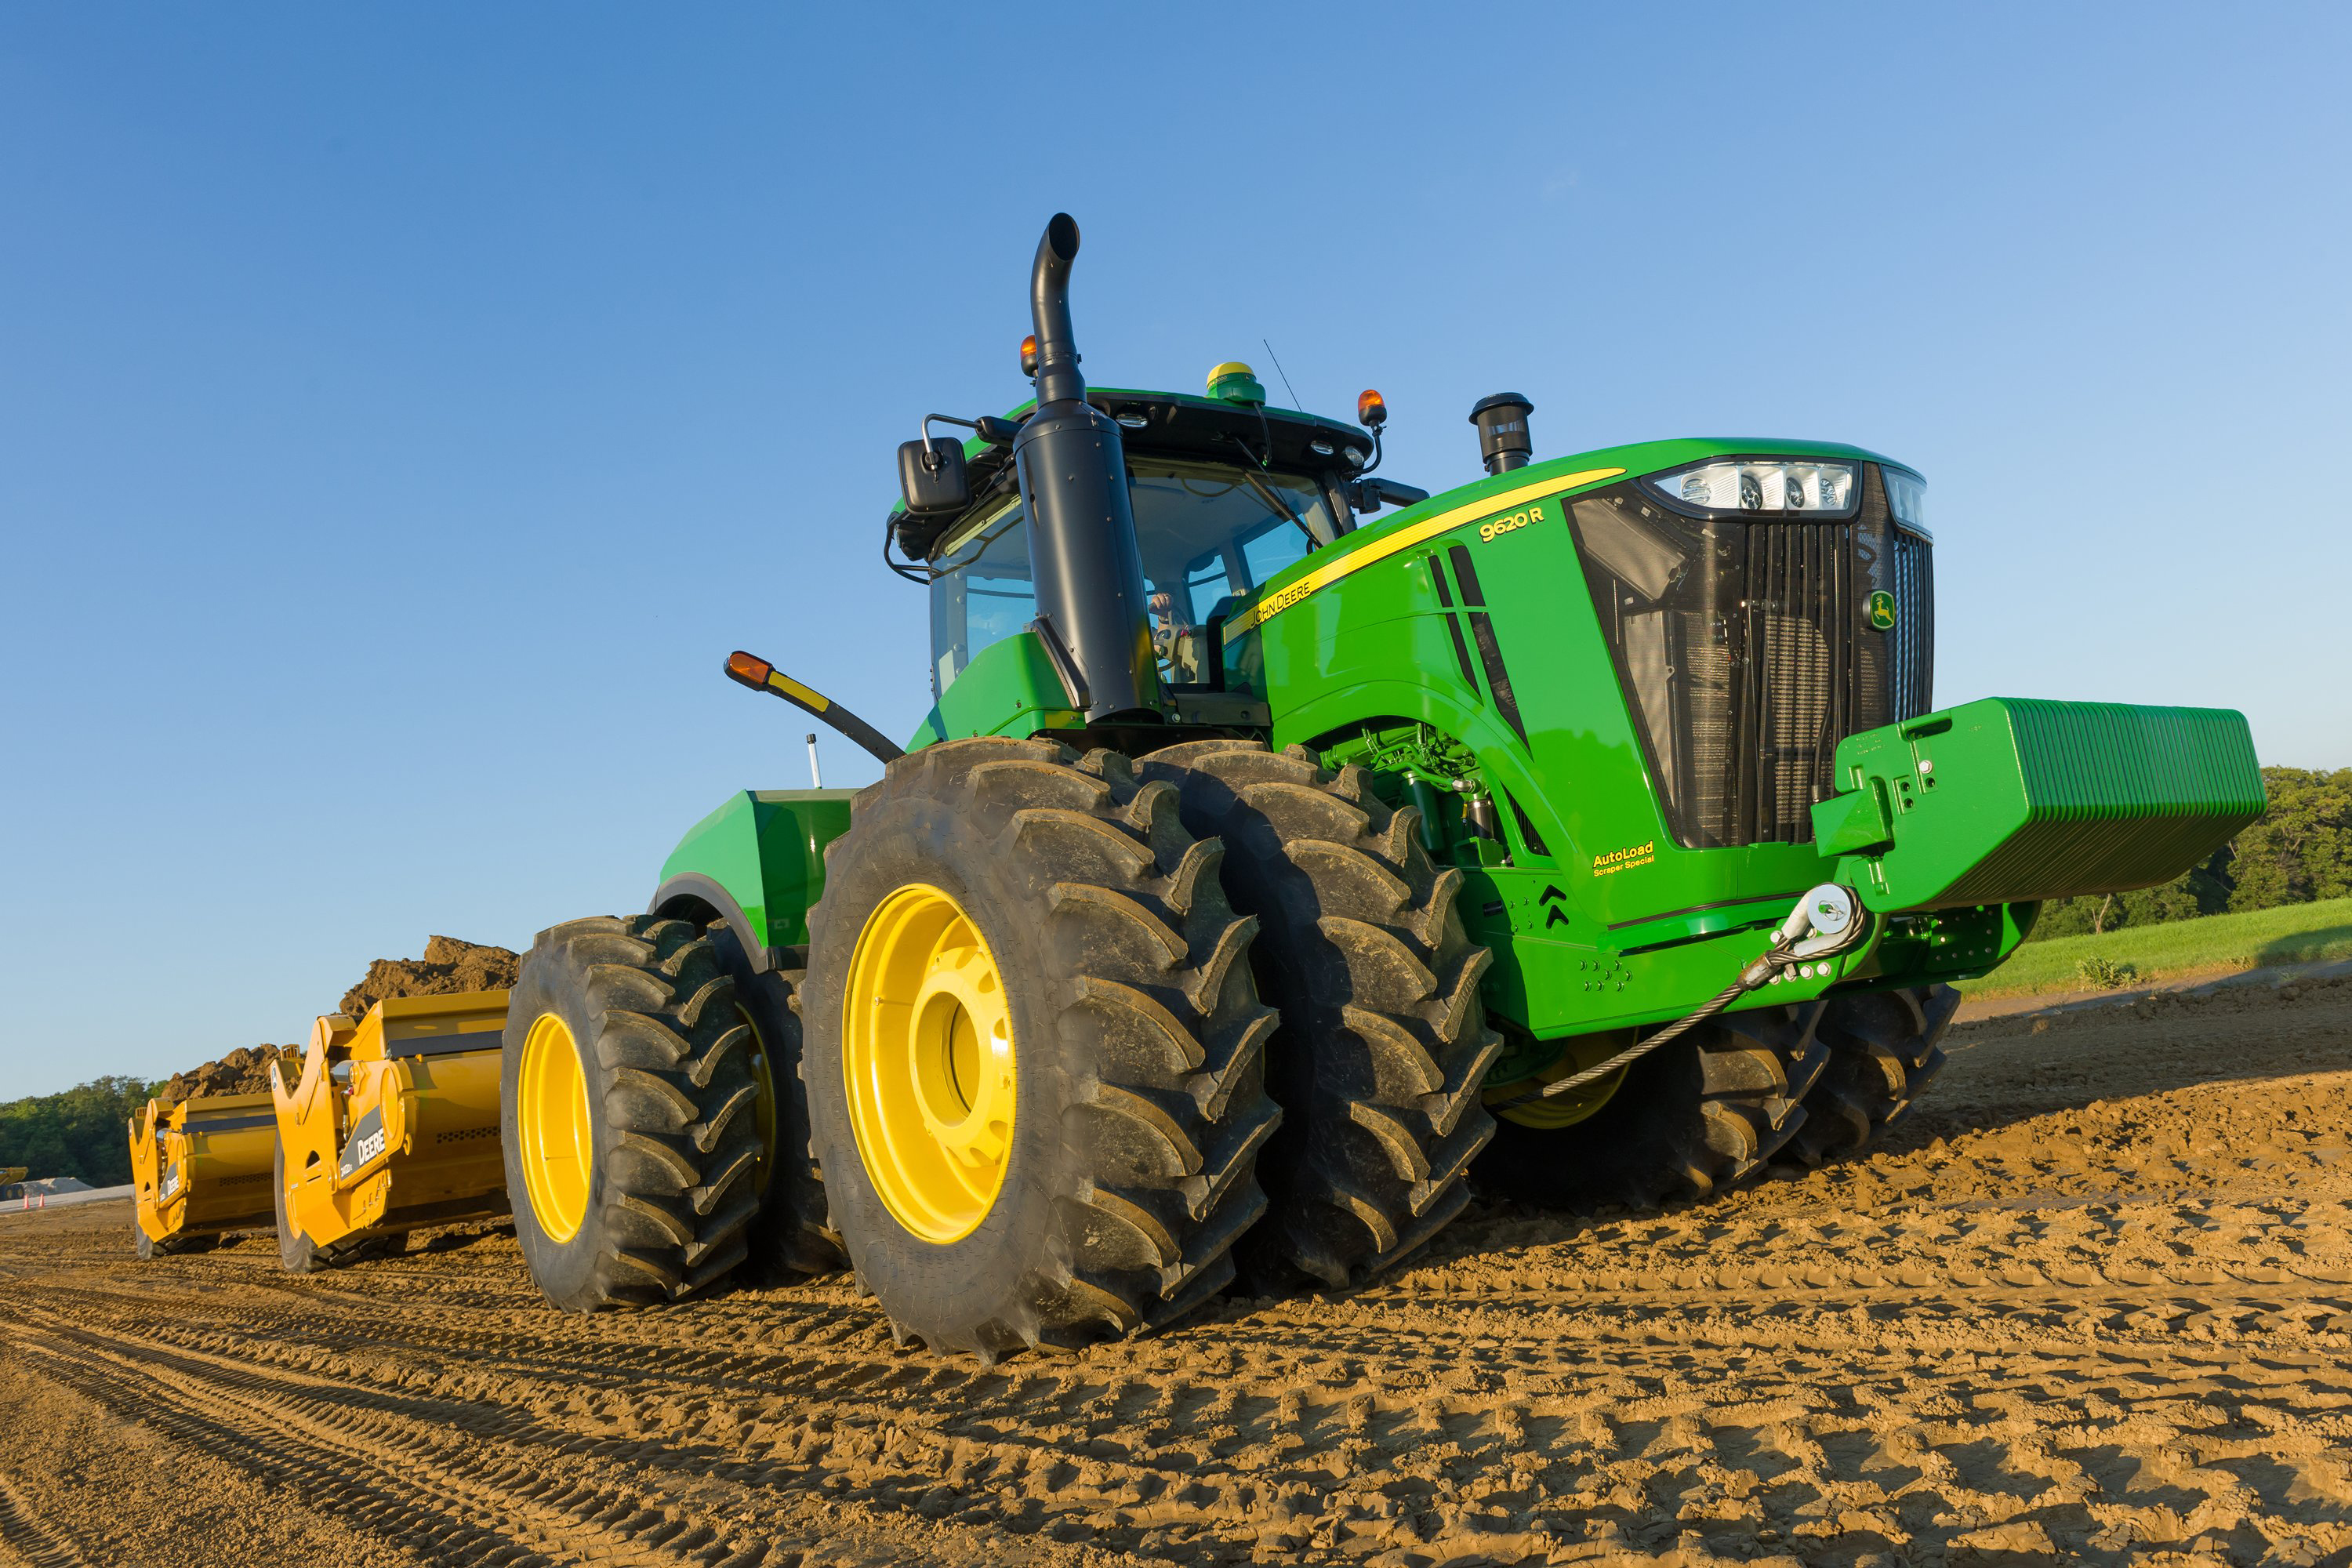 ... 9620R is the largest John Deere Scraper Special Series Tractor to date